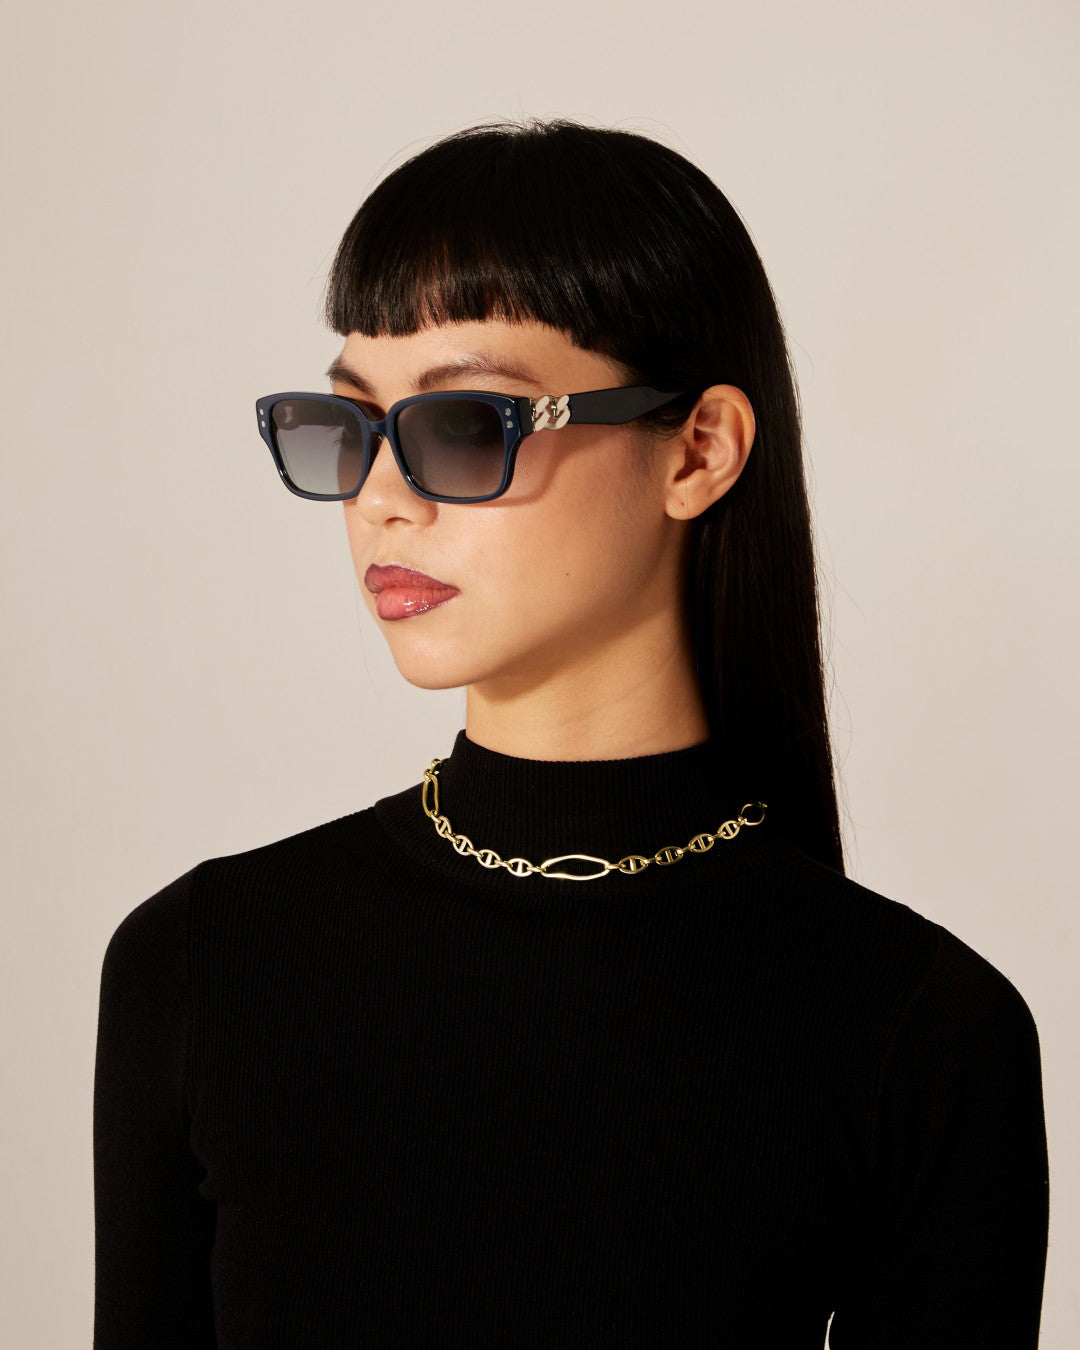 A person with straight black hair and bangs is wearing rectangular sunglasses with dark lenses, a black turtleneck, and a Portrait Necklace Gold by For Art&#39;s Sake®. The background is neutral.